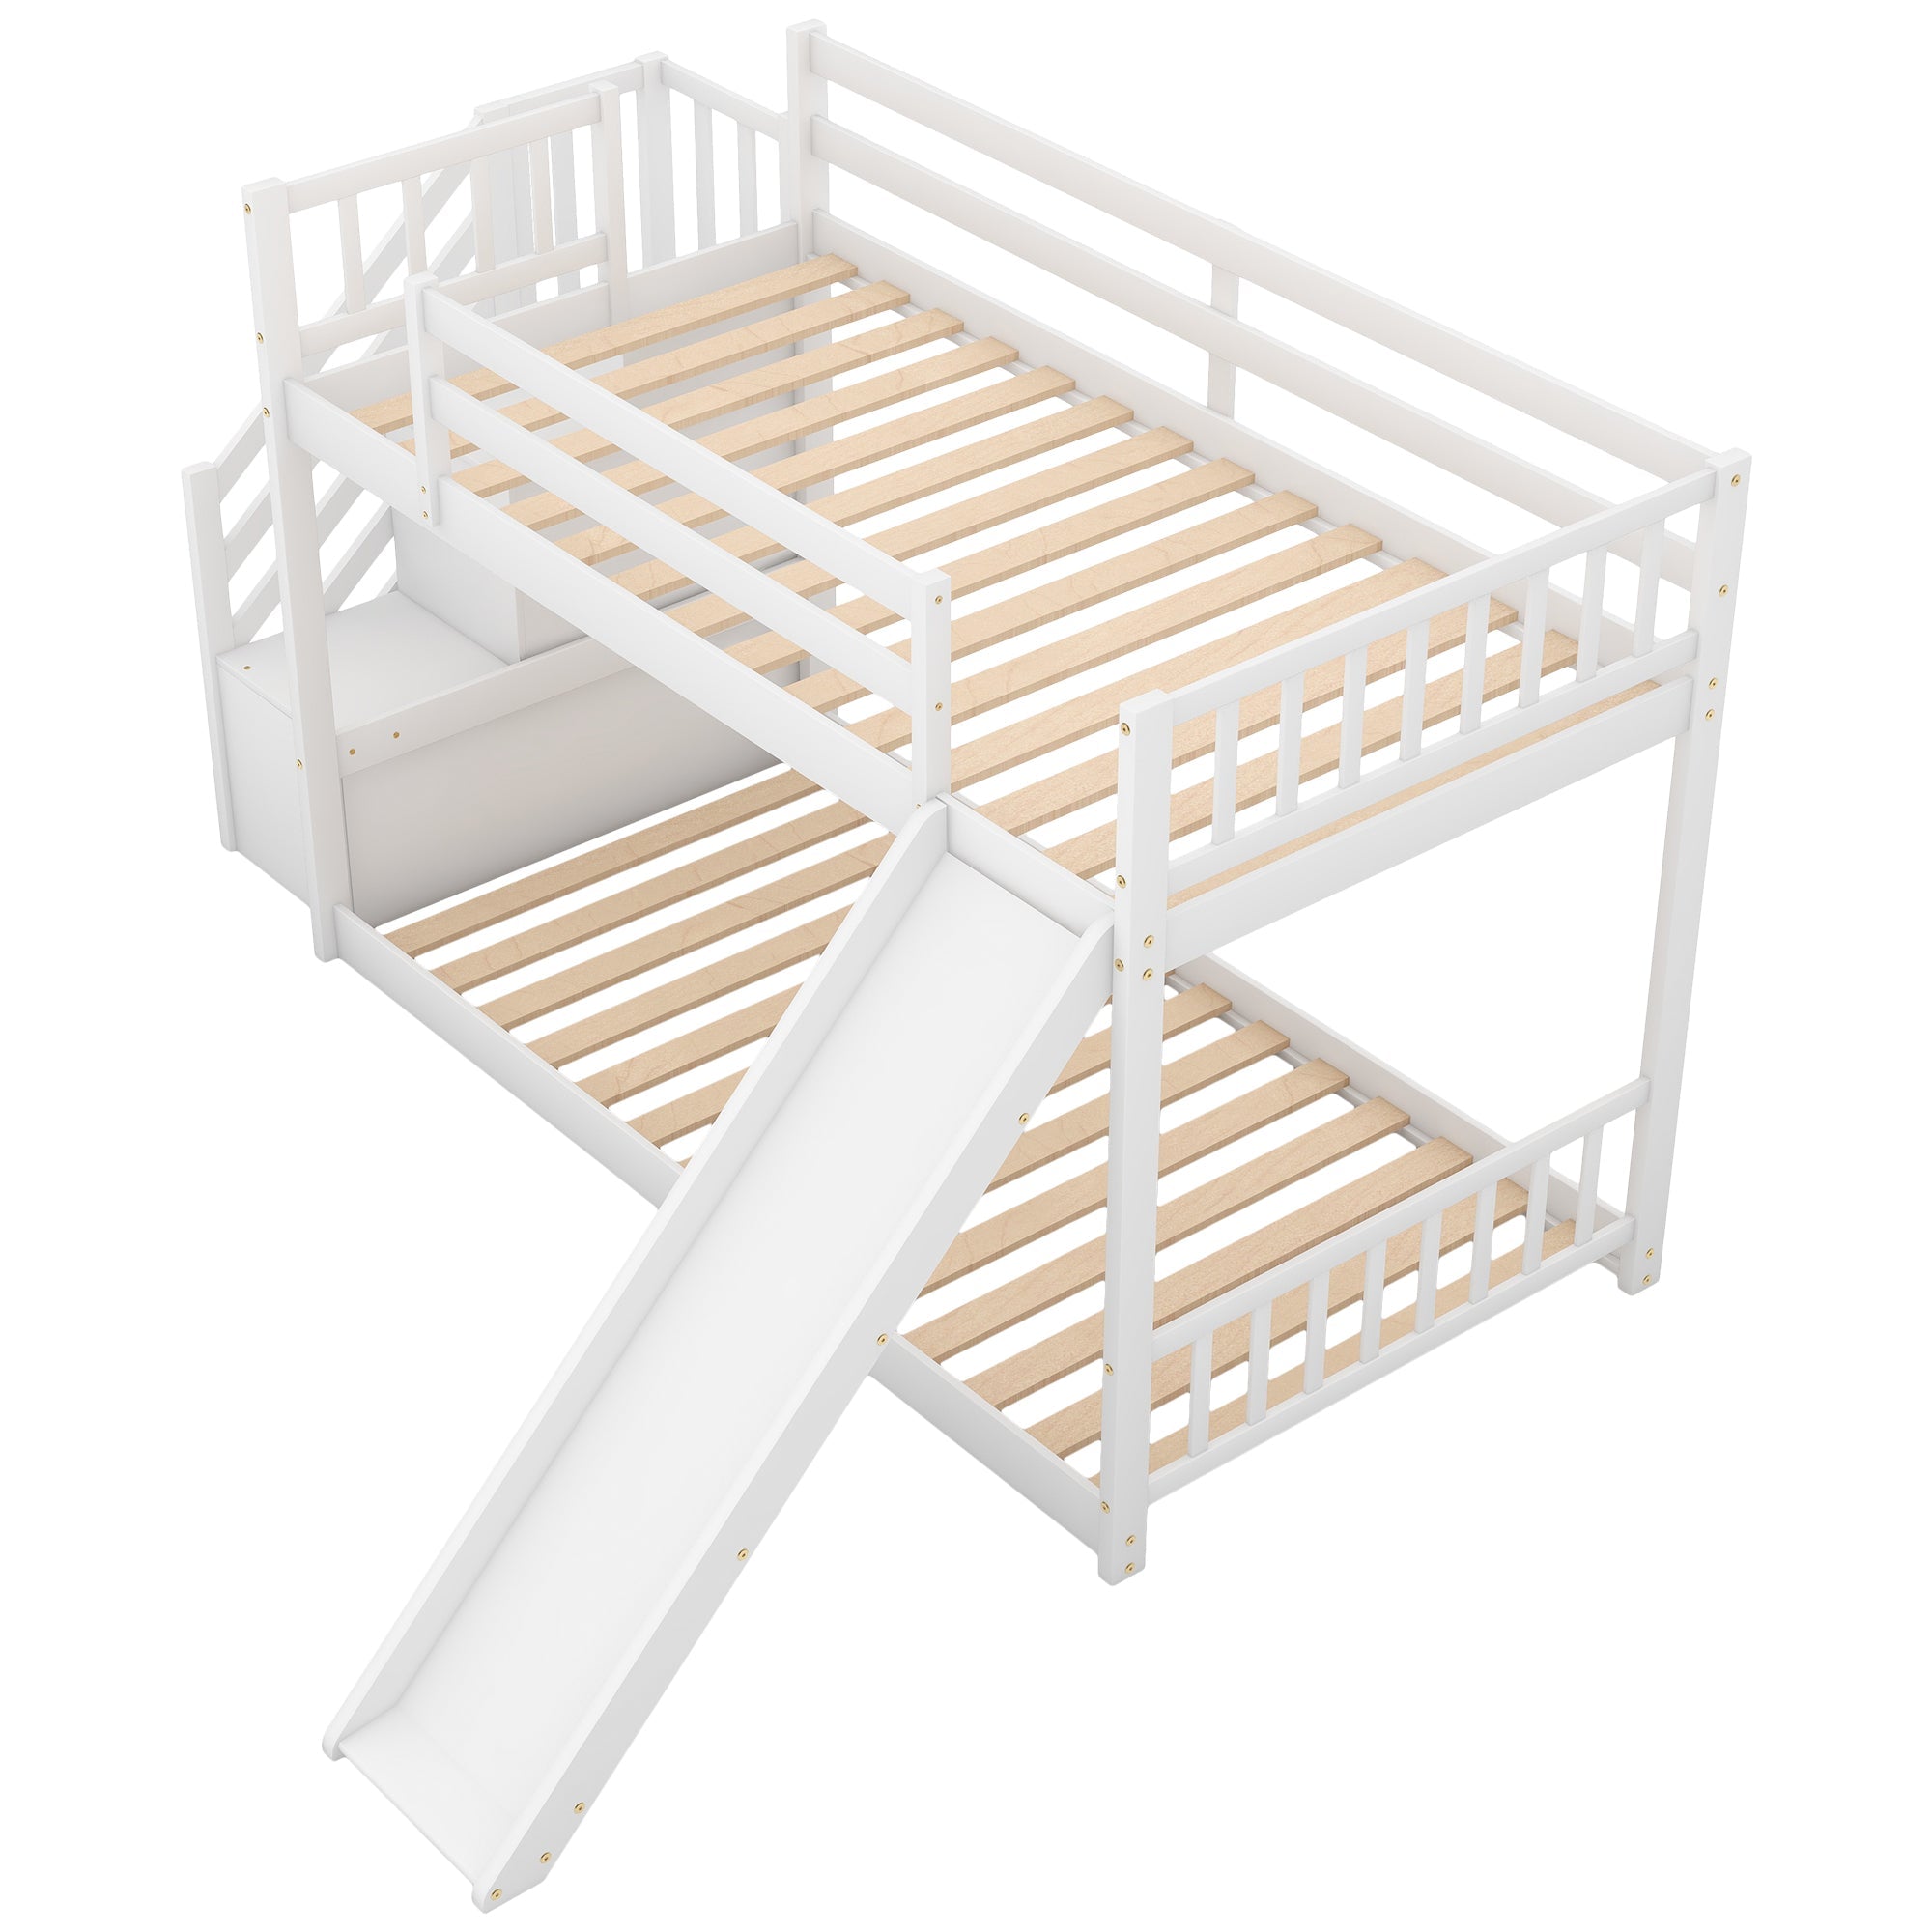 Euroco Twin over Twin Bunk Bed with Slide and Stairway for Kids' Room, White